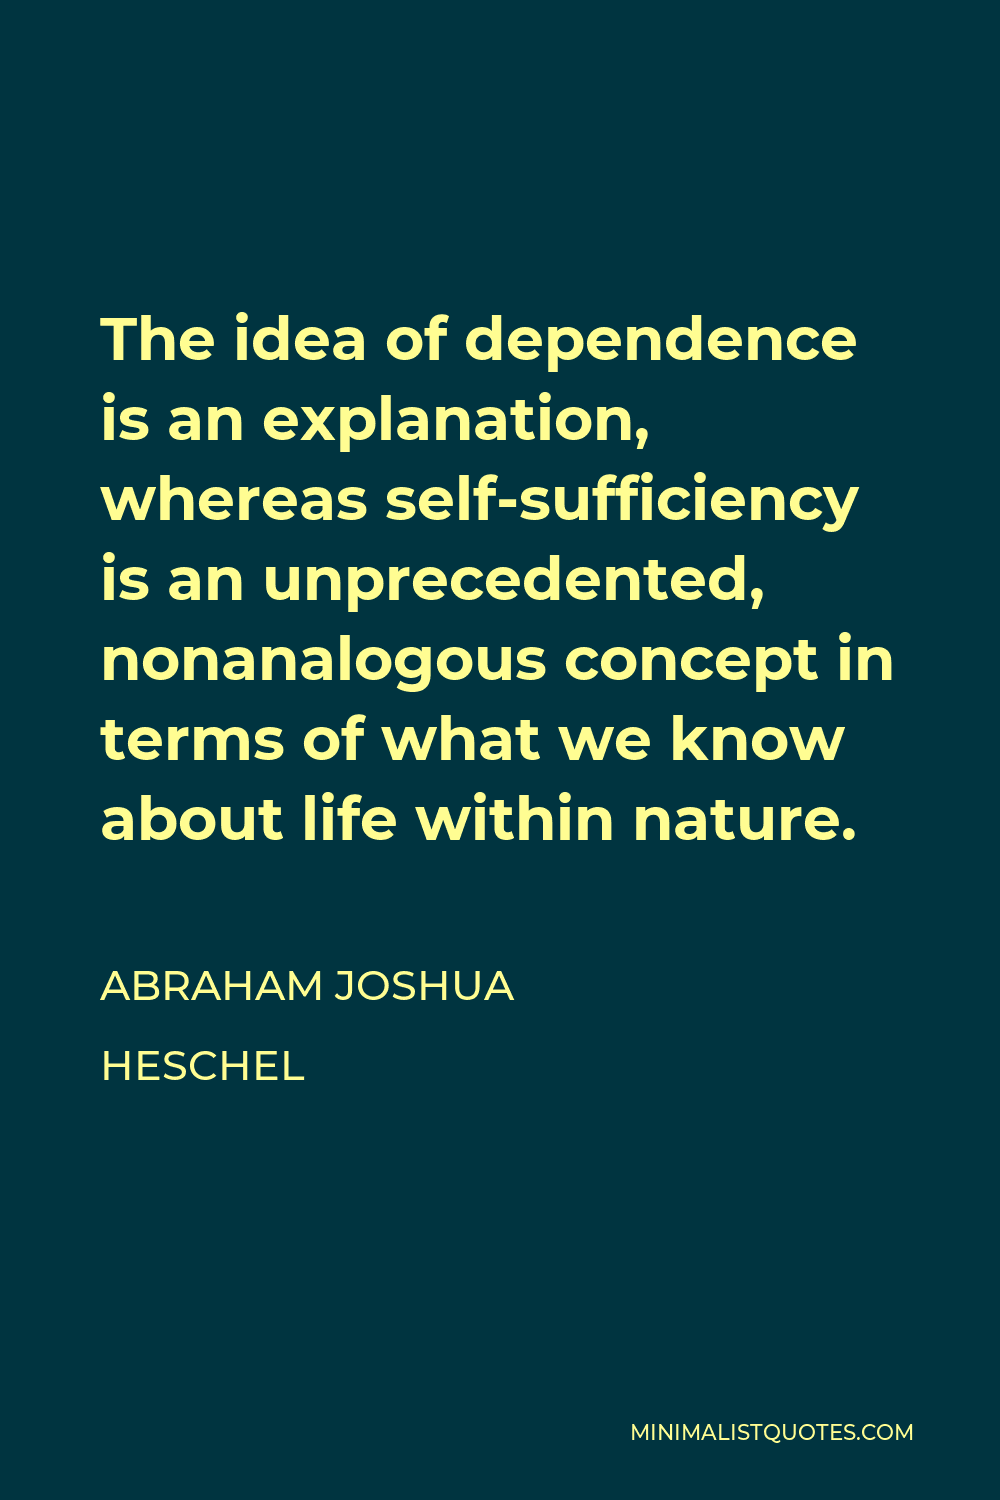 Abraham Joshua Heschel Quote - The idea of dependence is an explanation, whereas self-sufficiency is an unprecedented, nonanalogous concept in terms of what we know about life within nature.